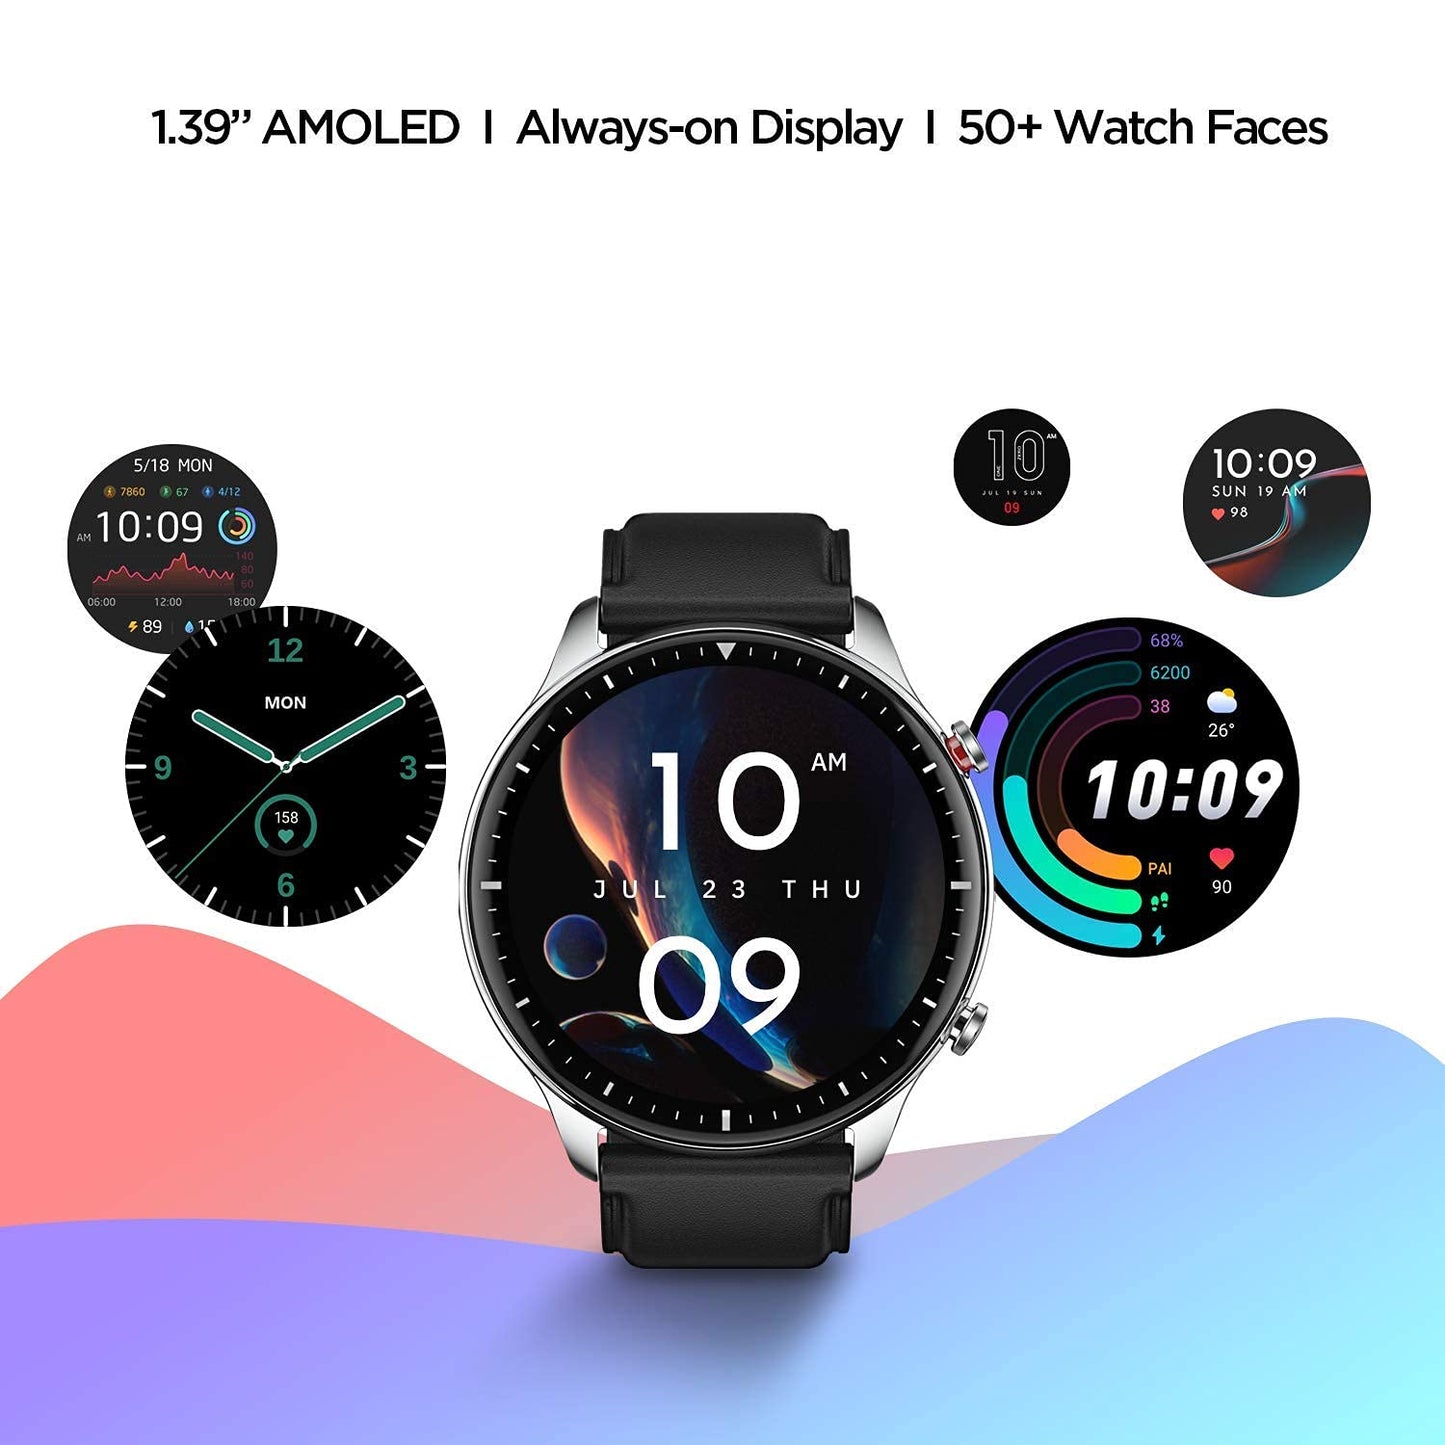 (Refurbished) Amazfit GTR 2 Smart Watch, 1.39" AMOLED Display, SpO2 & Stress Monitor, Built-in Alexa, Built-in GPS, Bluetooth Phone Calls, 3GB Music Storage, 14-Day Battery Life, 90 Sports Modes (Classic Edition)